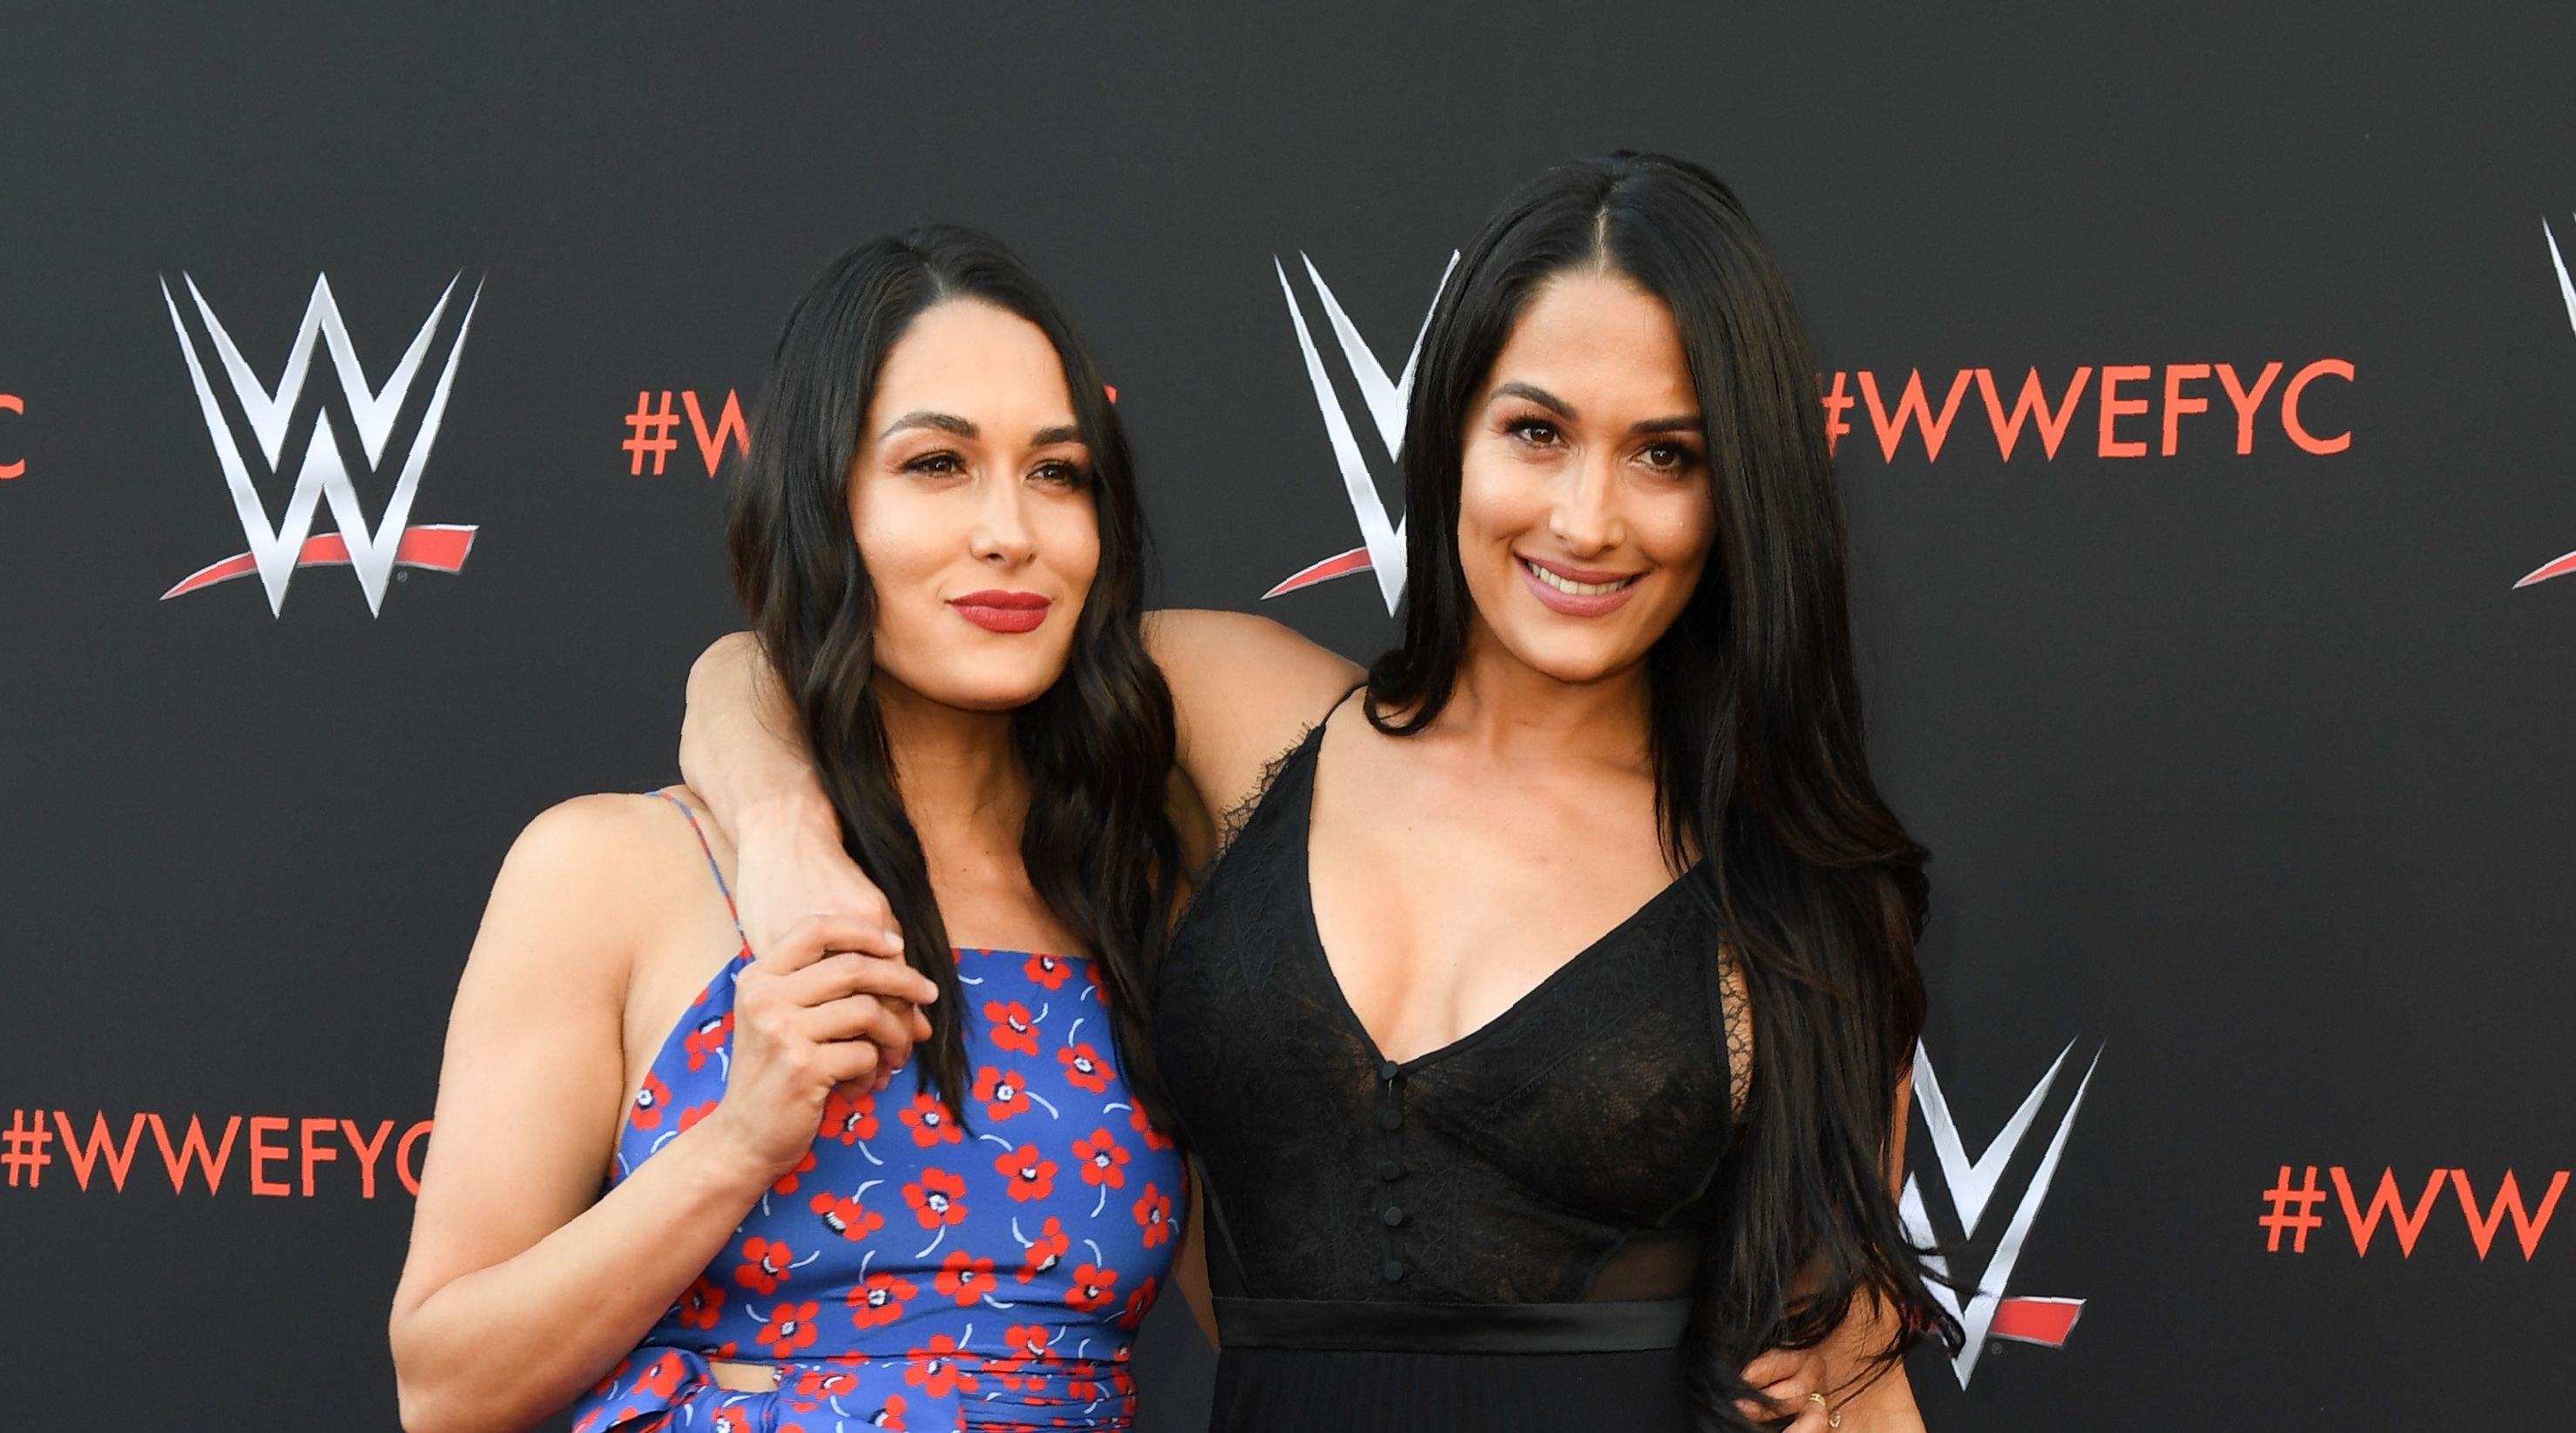 Bella Twins to host Meet and Greet session at Las Vegas Wine & Food Tour